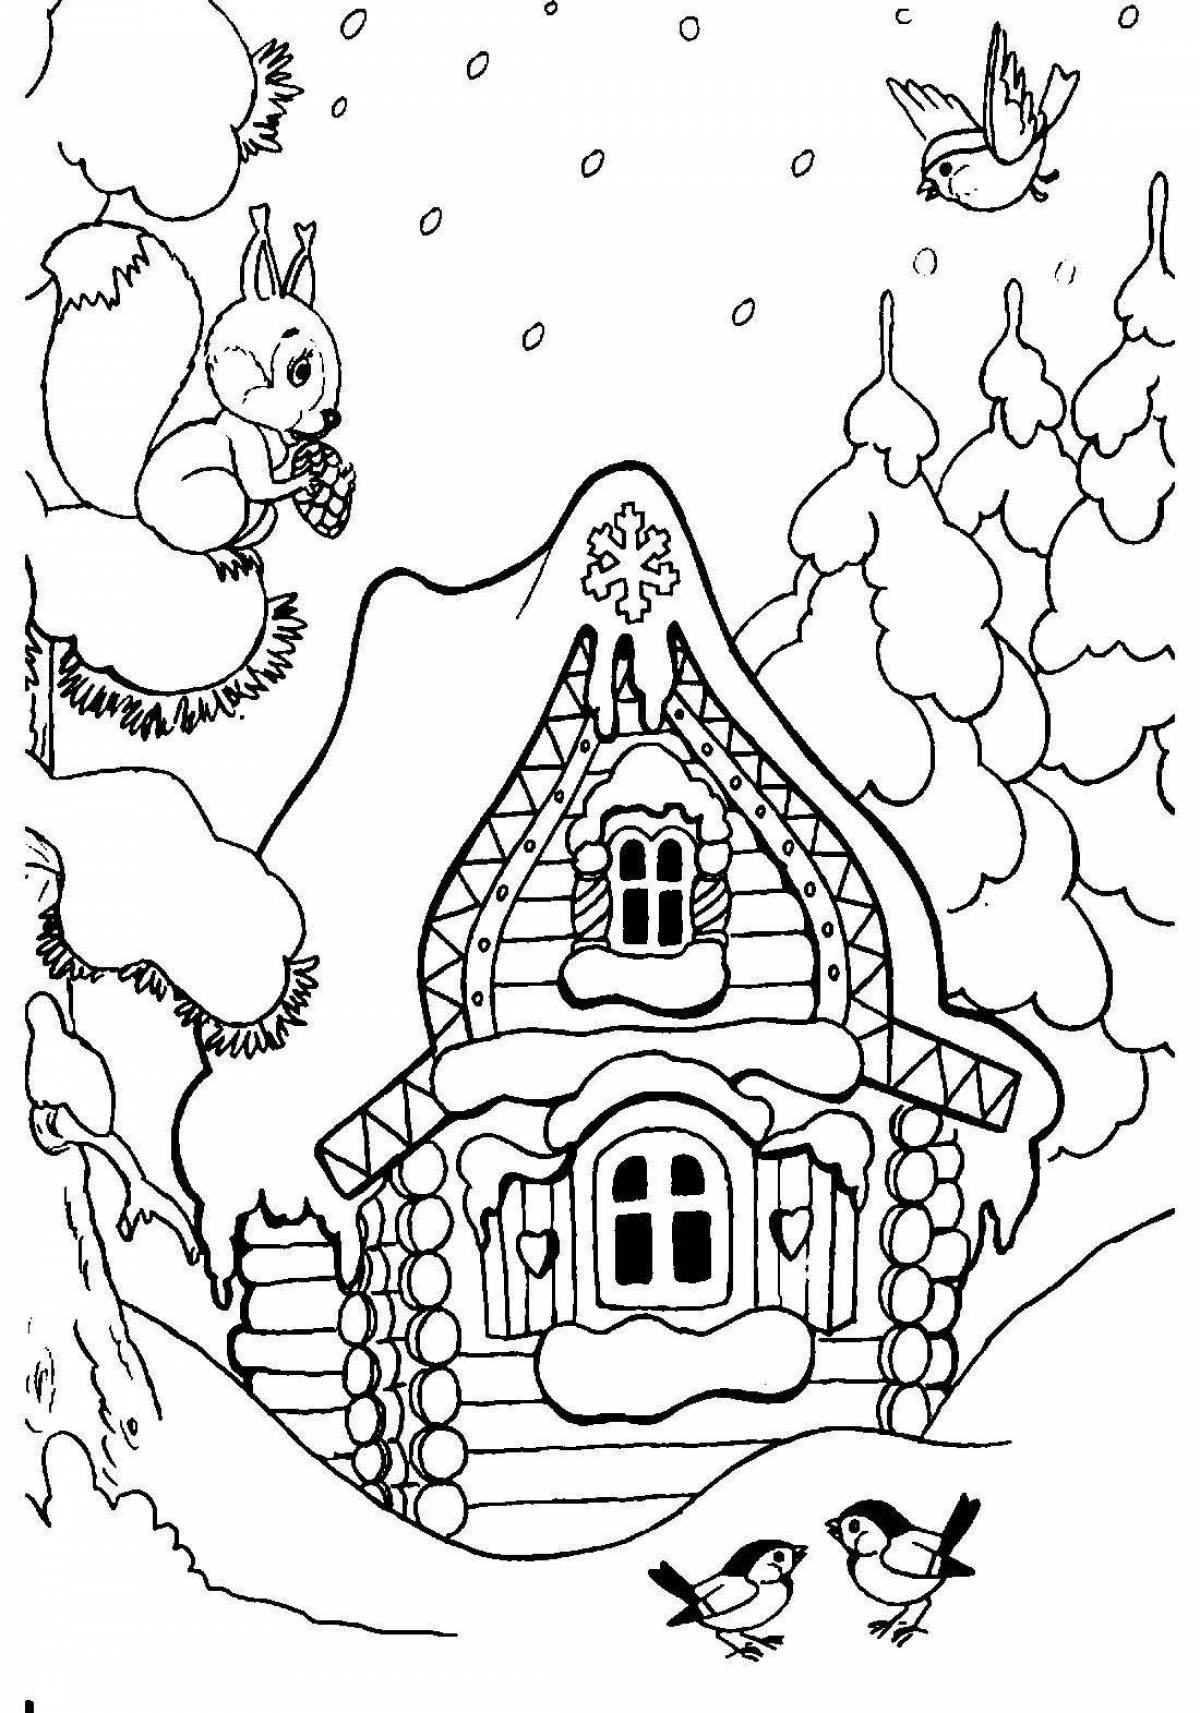 Coloring page gorgeous winter village